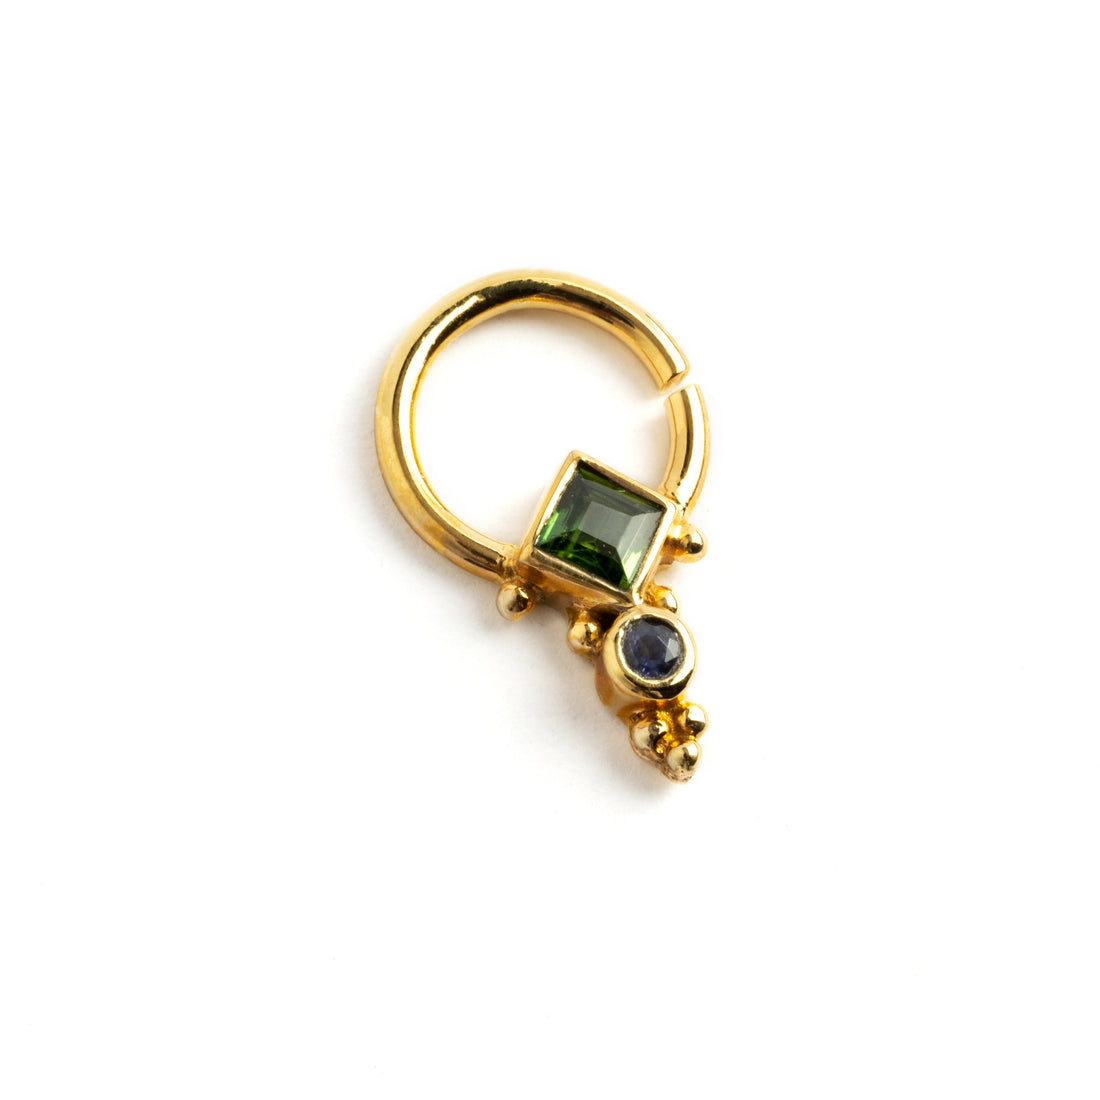 A beautiful settings of Tourmaline and Lolite septum ring, hand crafted with 925 silver and 18k gold plating finish. Rabia-Gold-Septum-with-Turmaline-and-Iolite_3Rishi Gold Septum - Tourmaline and Lolite right side view